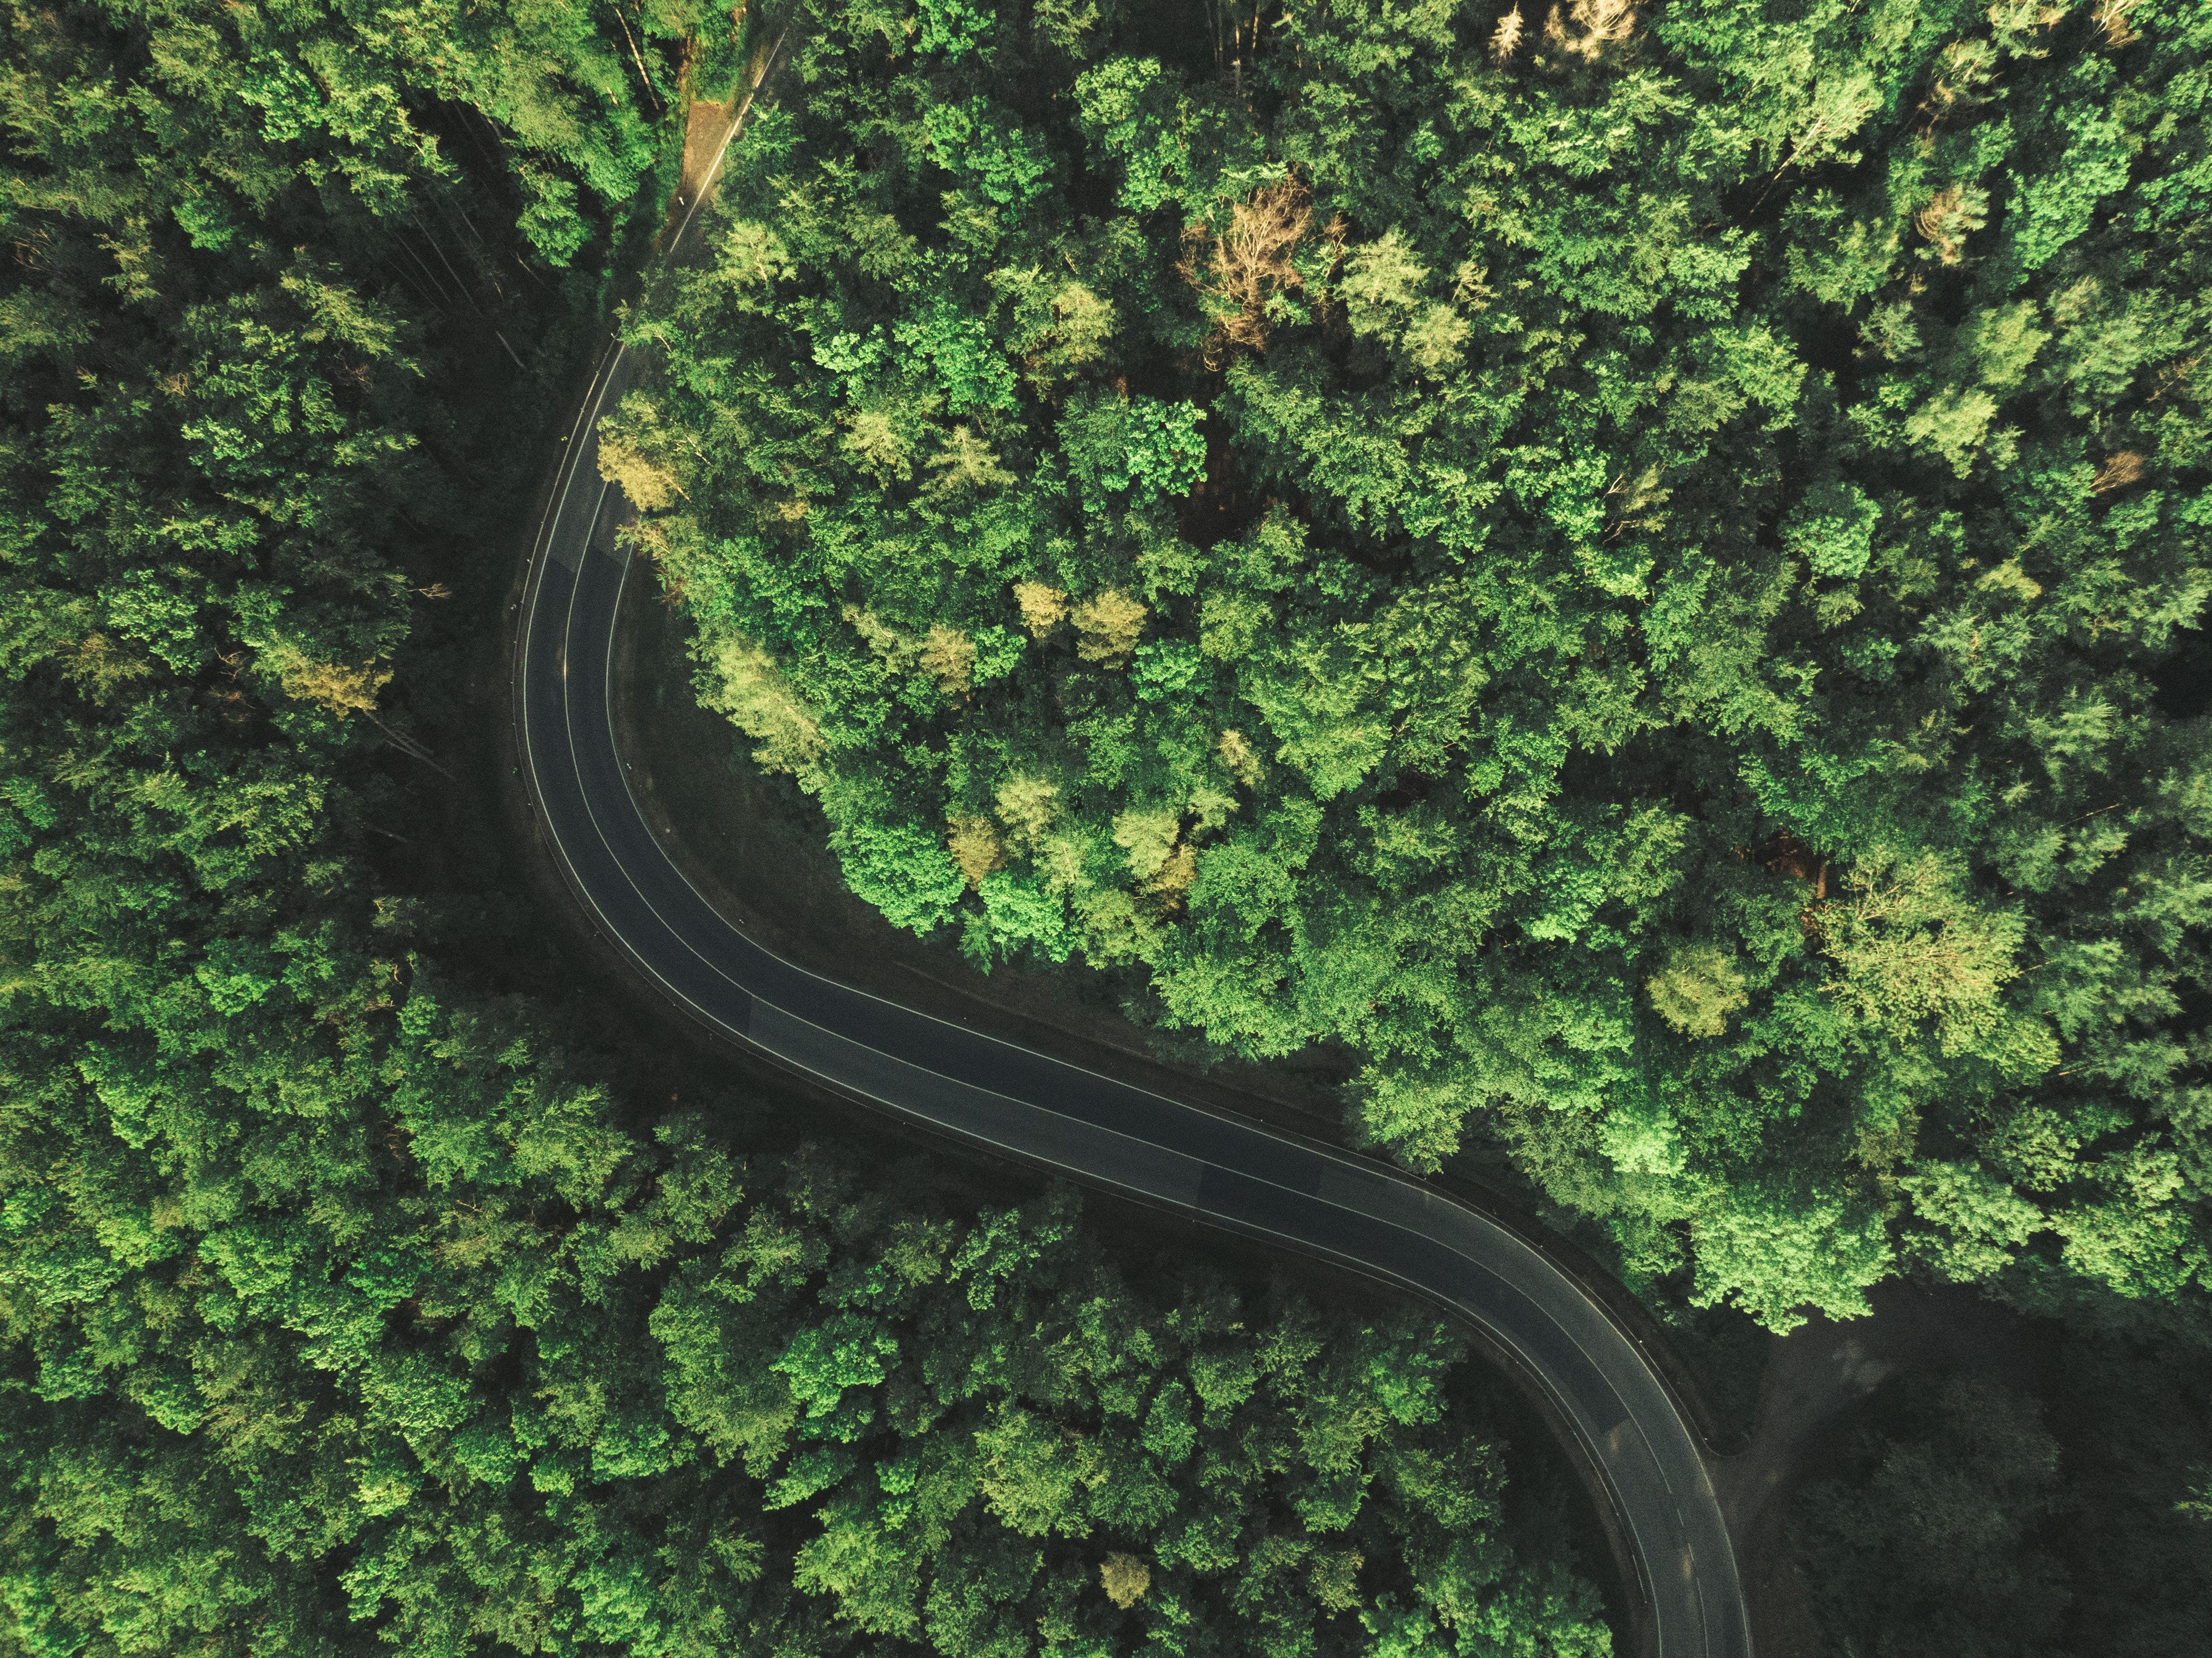 Colombia’s Government issued green road infrastructure guidelines